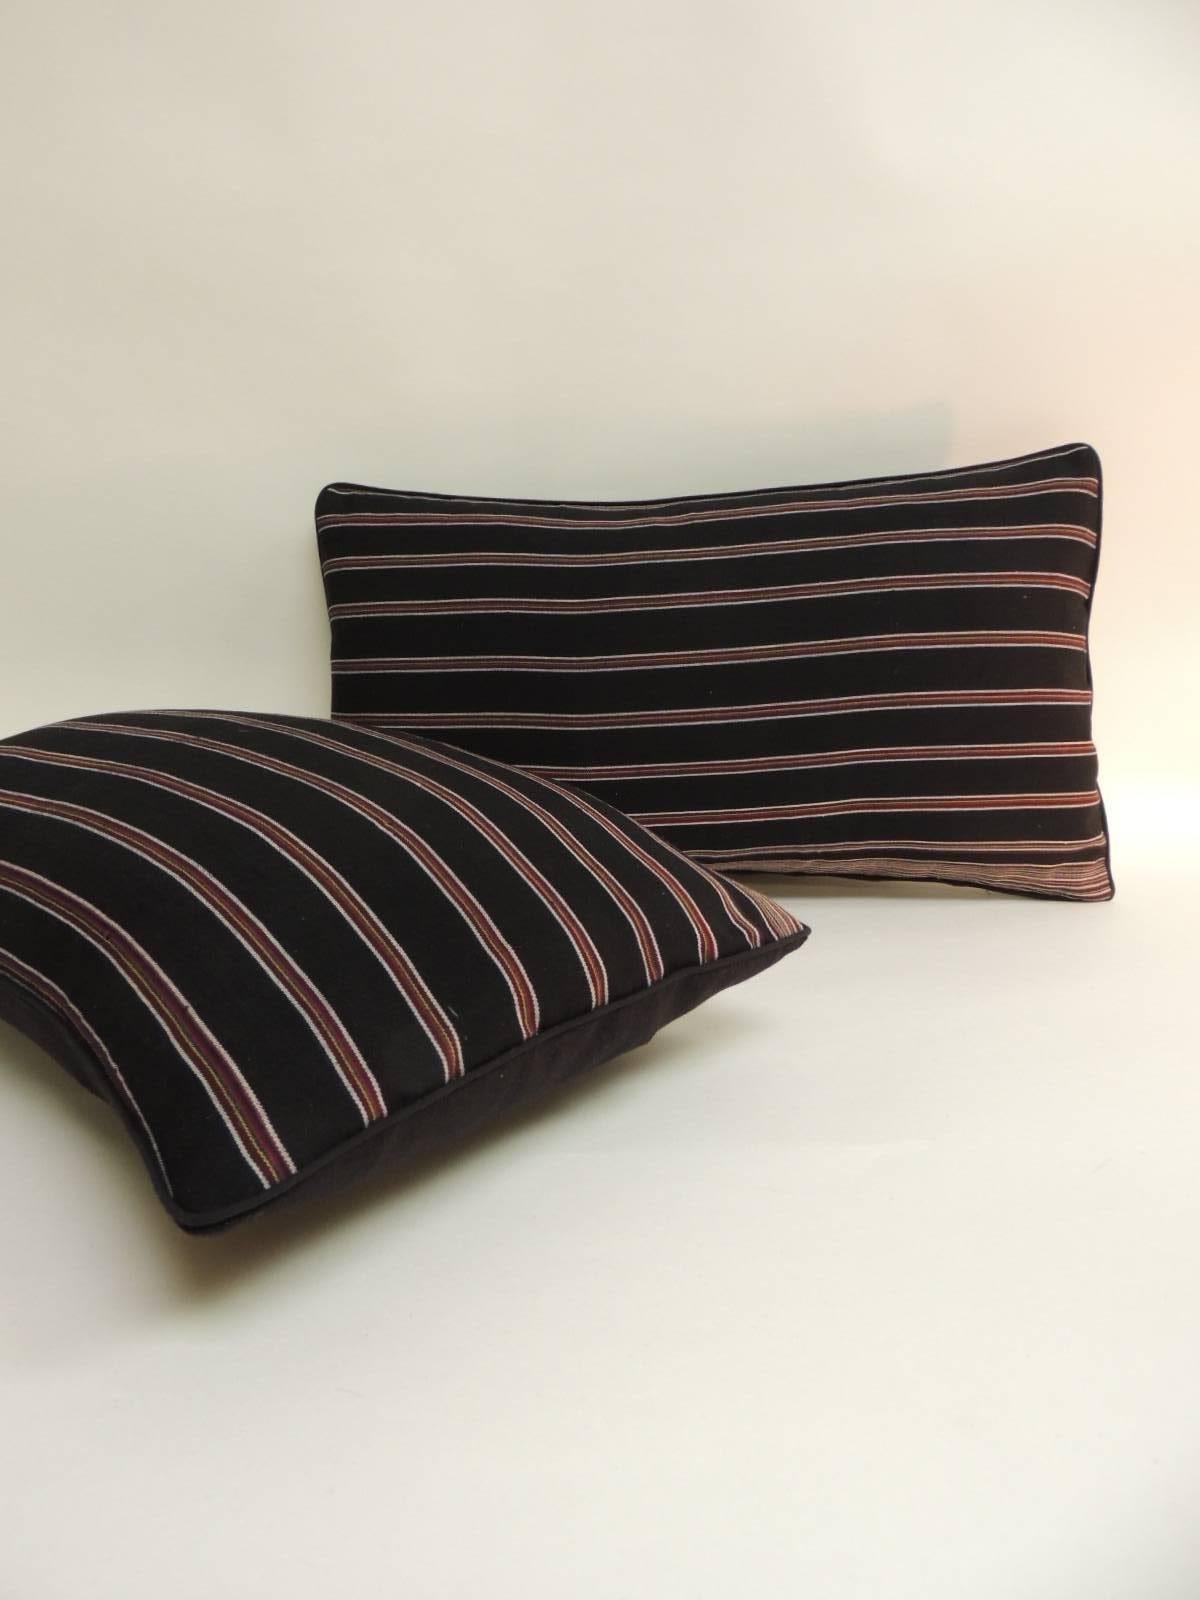 Hand-Crafted Pair of Woven Obi Red and Black Stripes Lumbar Decorative Pillows